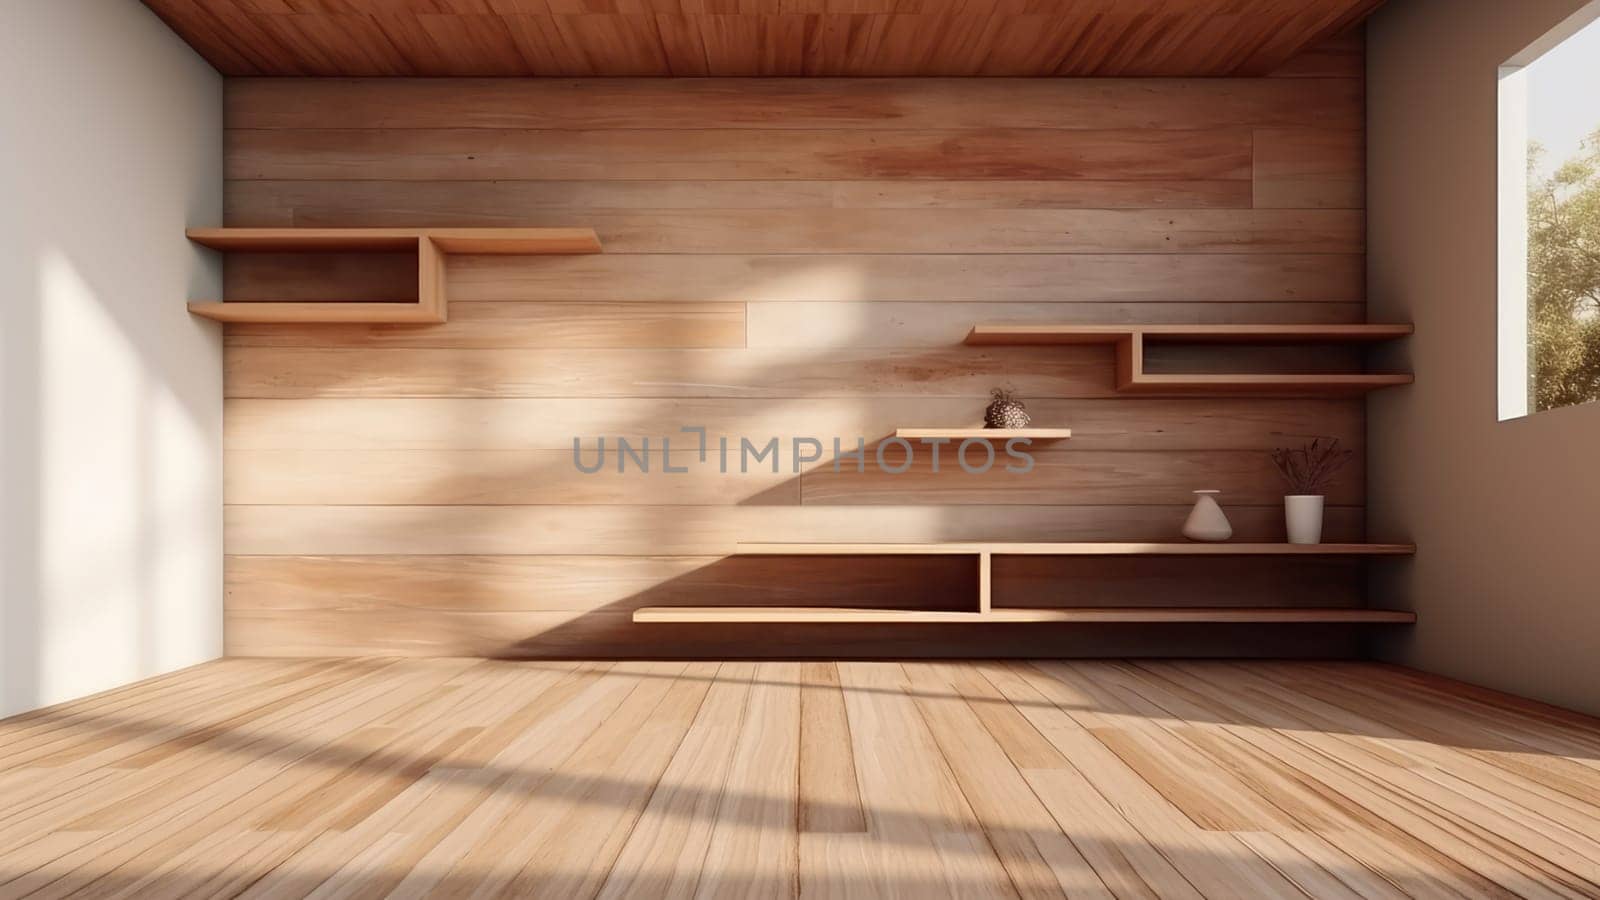 3D interior rendering of a built-in wooden shelving on a wooden wall and potted plant in living room.